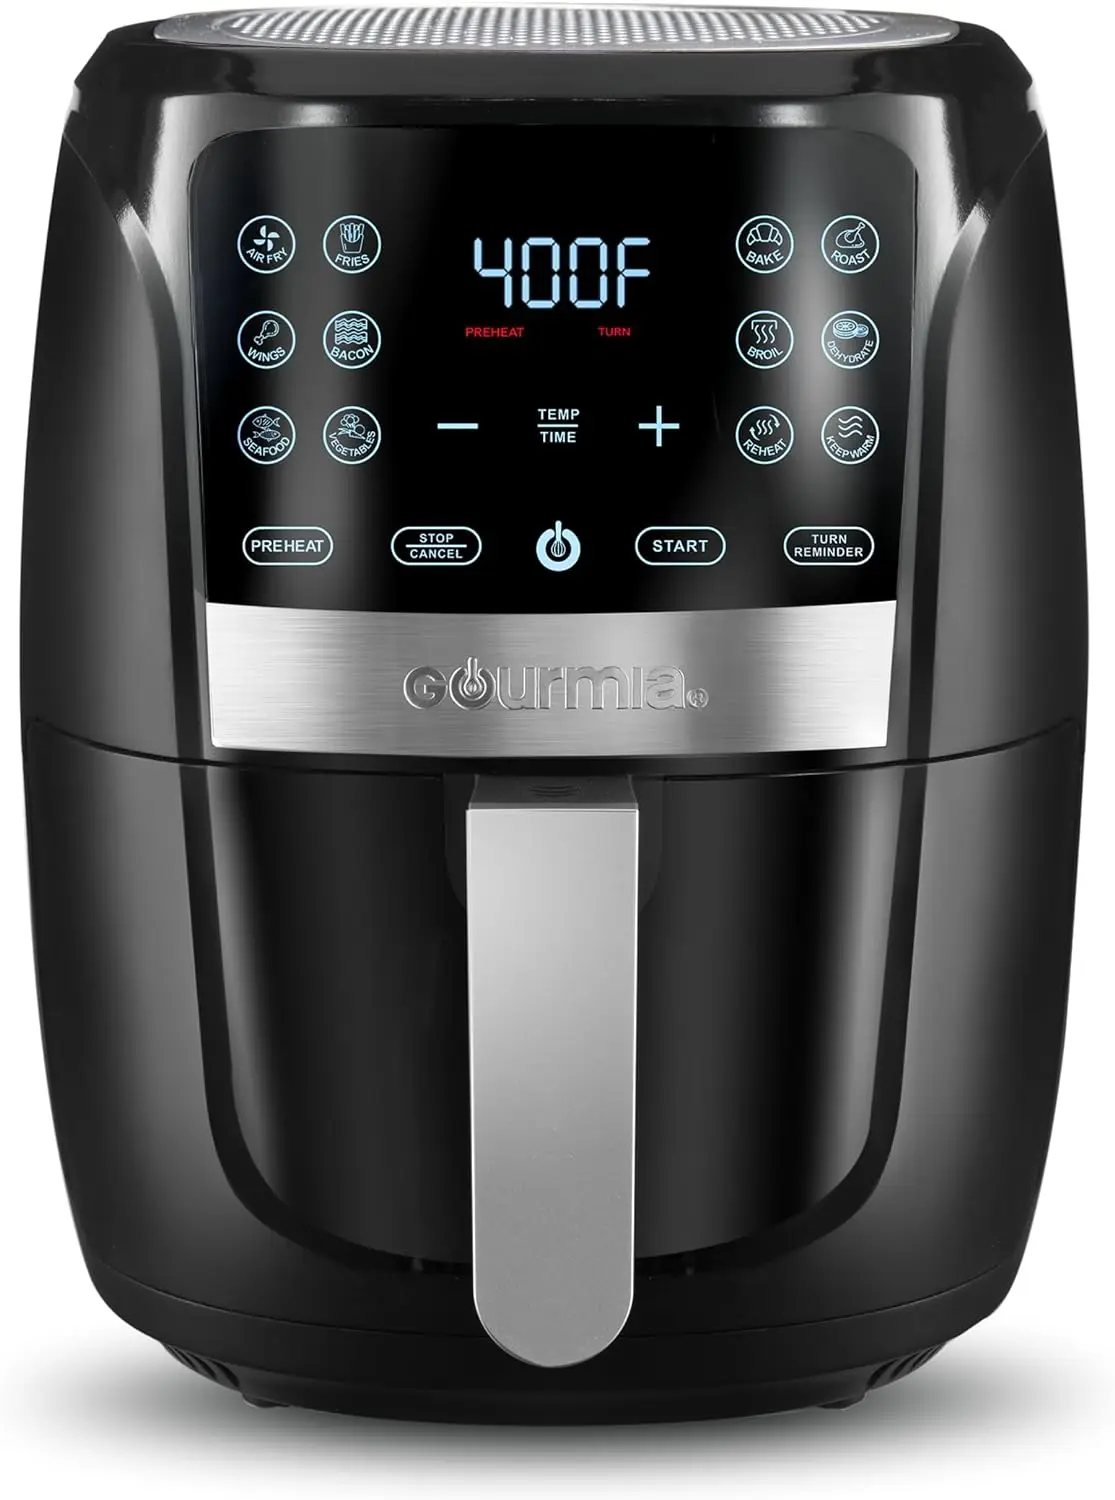 

Air Fryer Oven Digital Display 5 Quart Large AirFryer Cooker 12 Touch Cooking Presets, XL Air Fryer Basket 1500w Power Multifunc